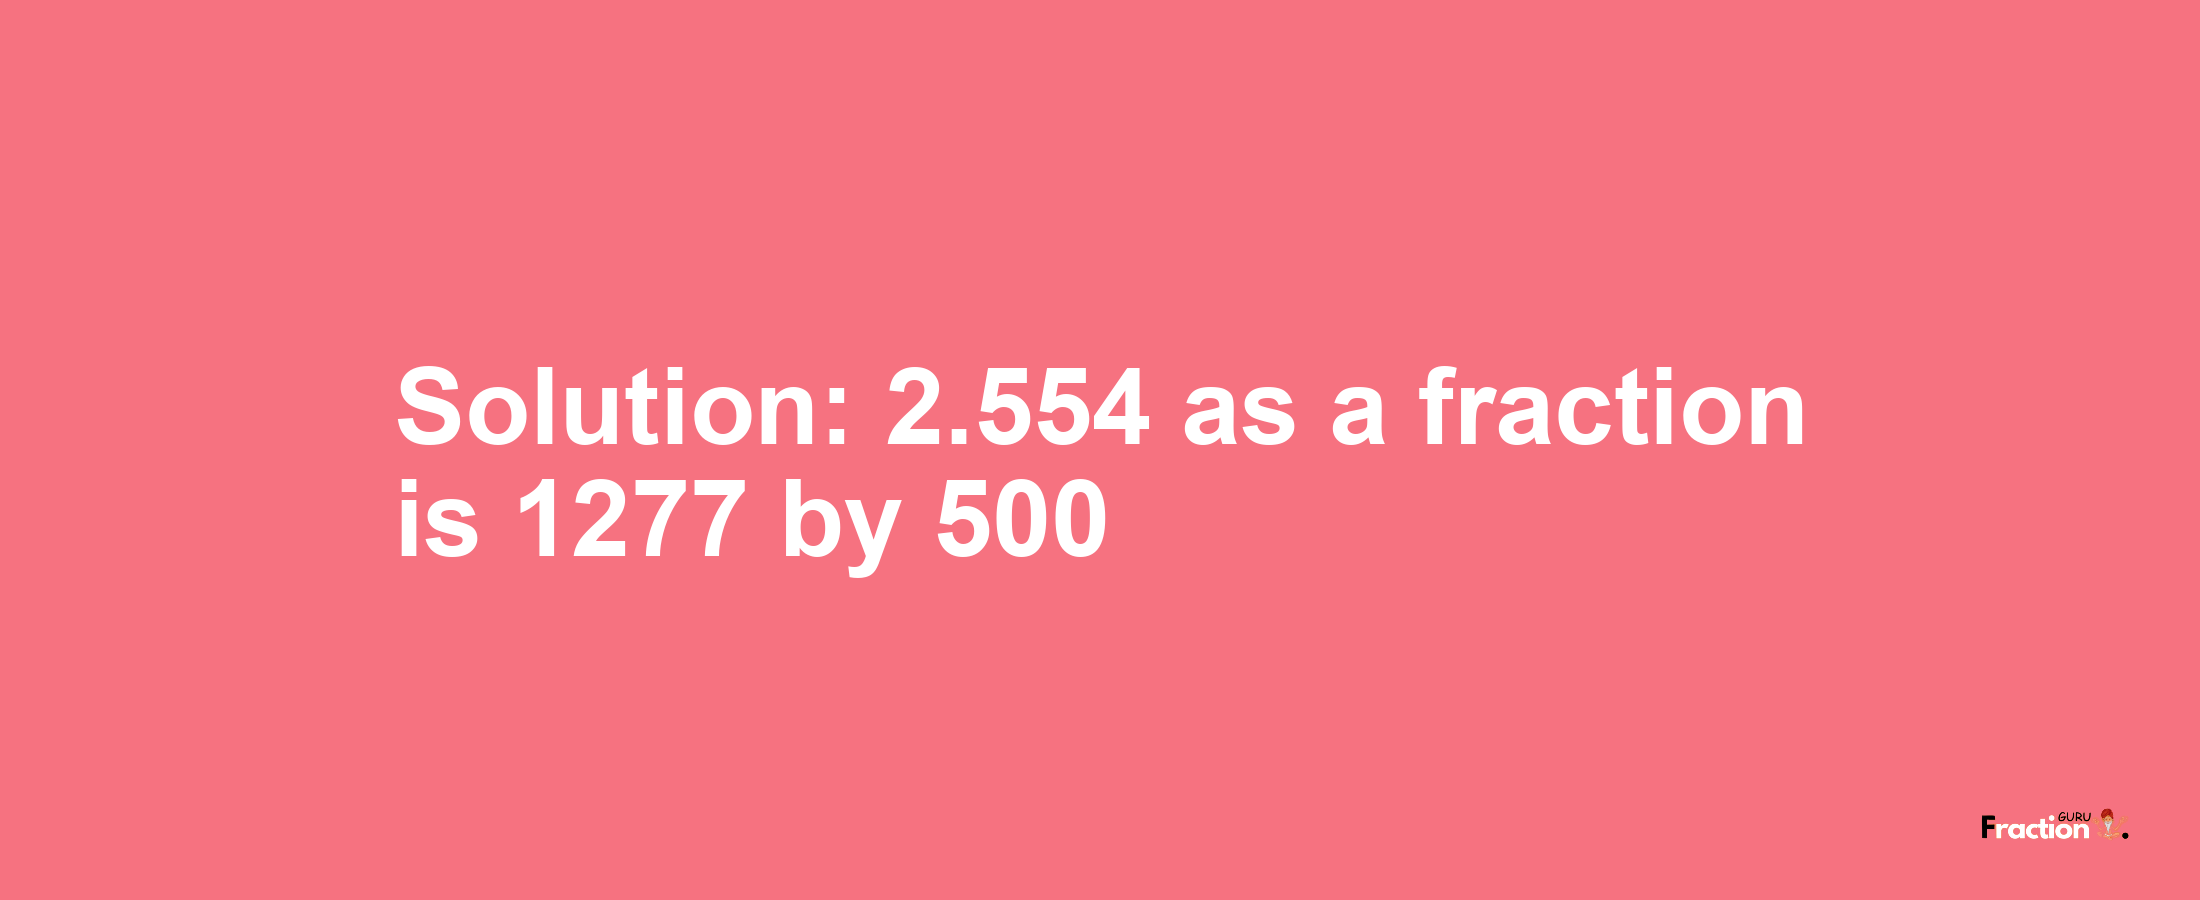 Solution:2.554 as a fraction is 1277/500